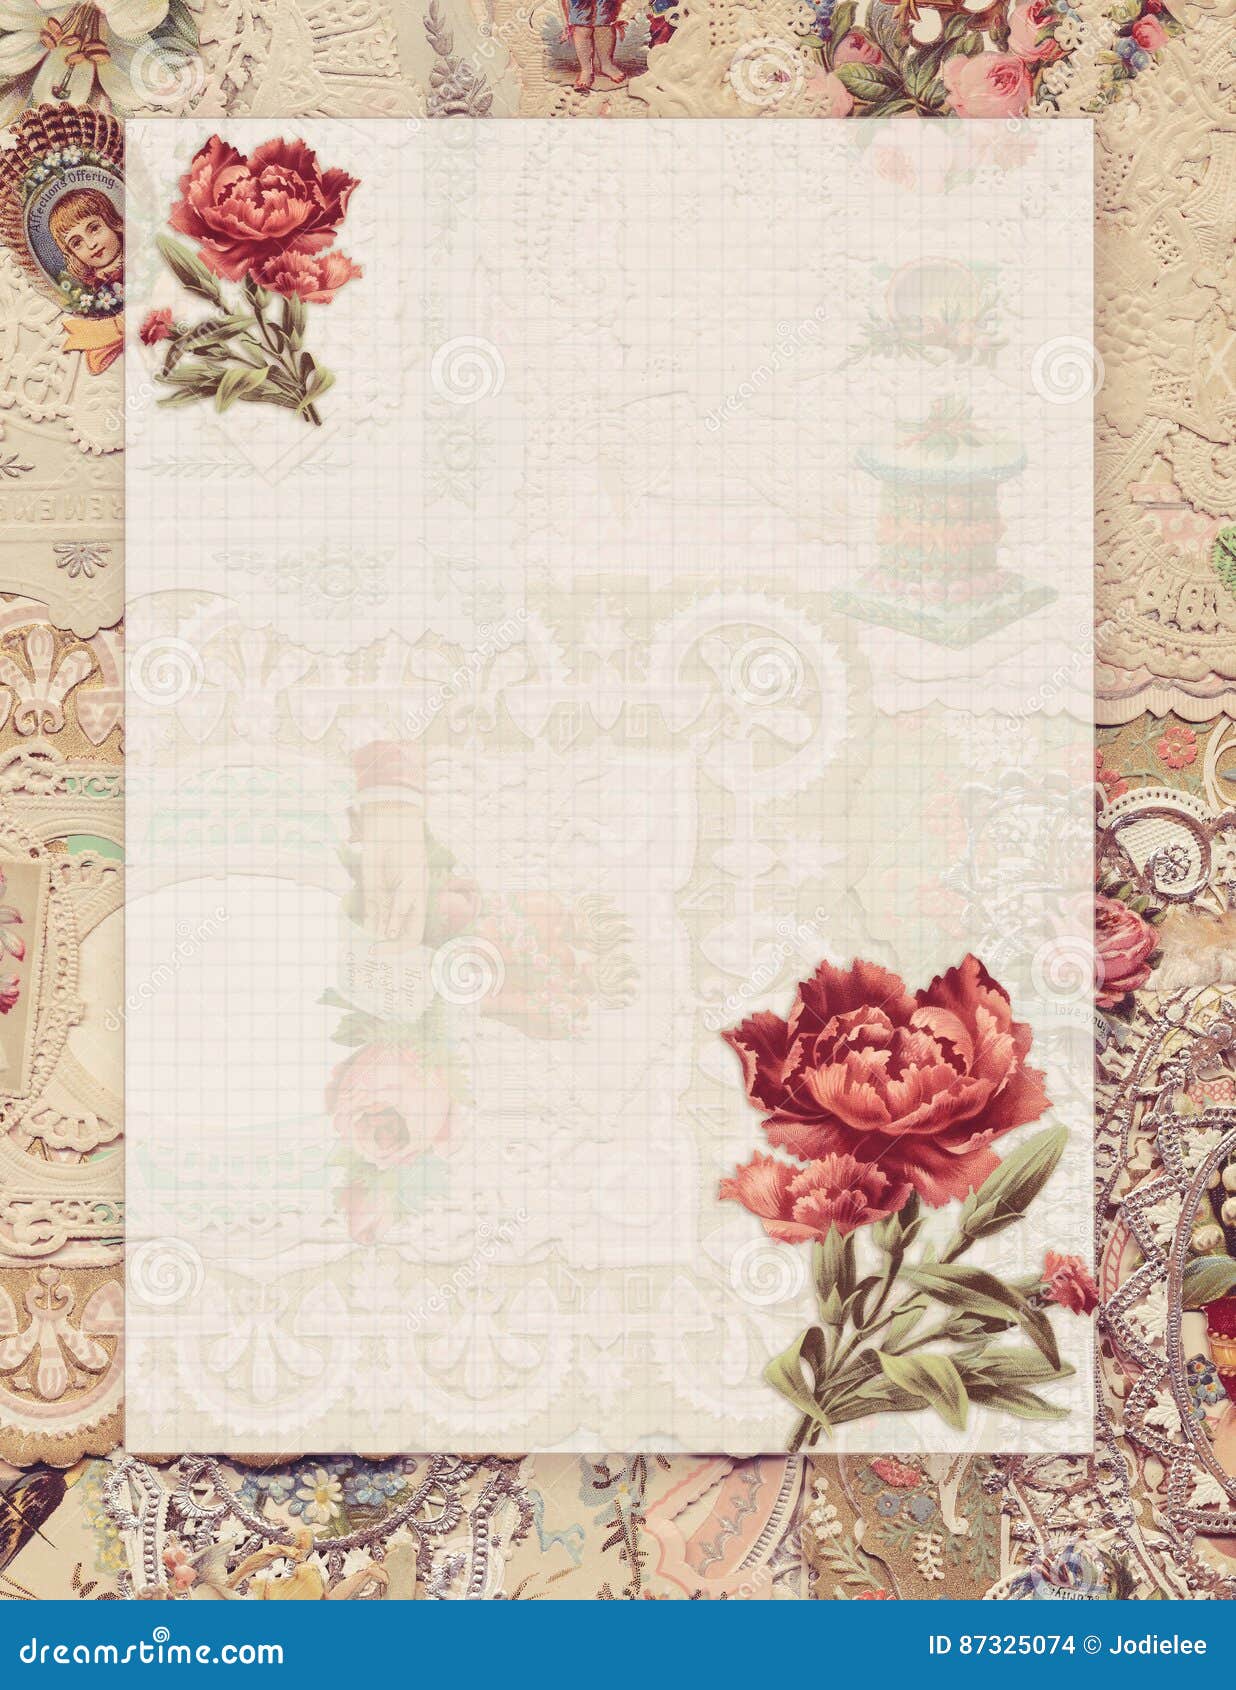 Printable Vintage Shabby Chic Style Floral Stationary On Antique Victorian Collaged Paper Background Stock Illustration Illustration Of Check Note 87325074